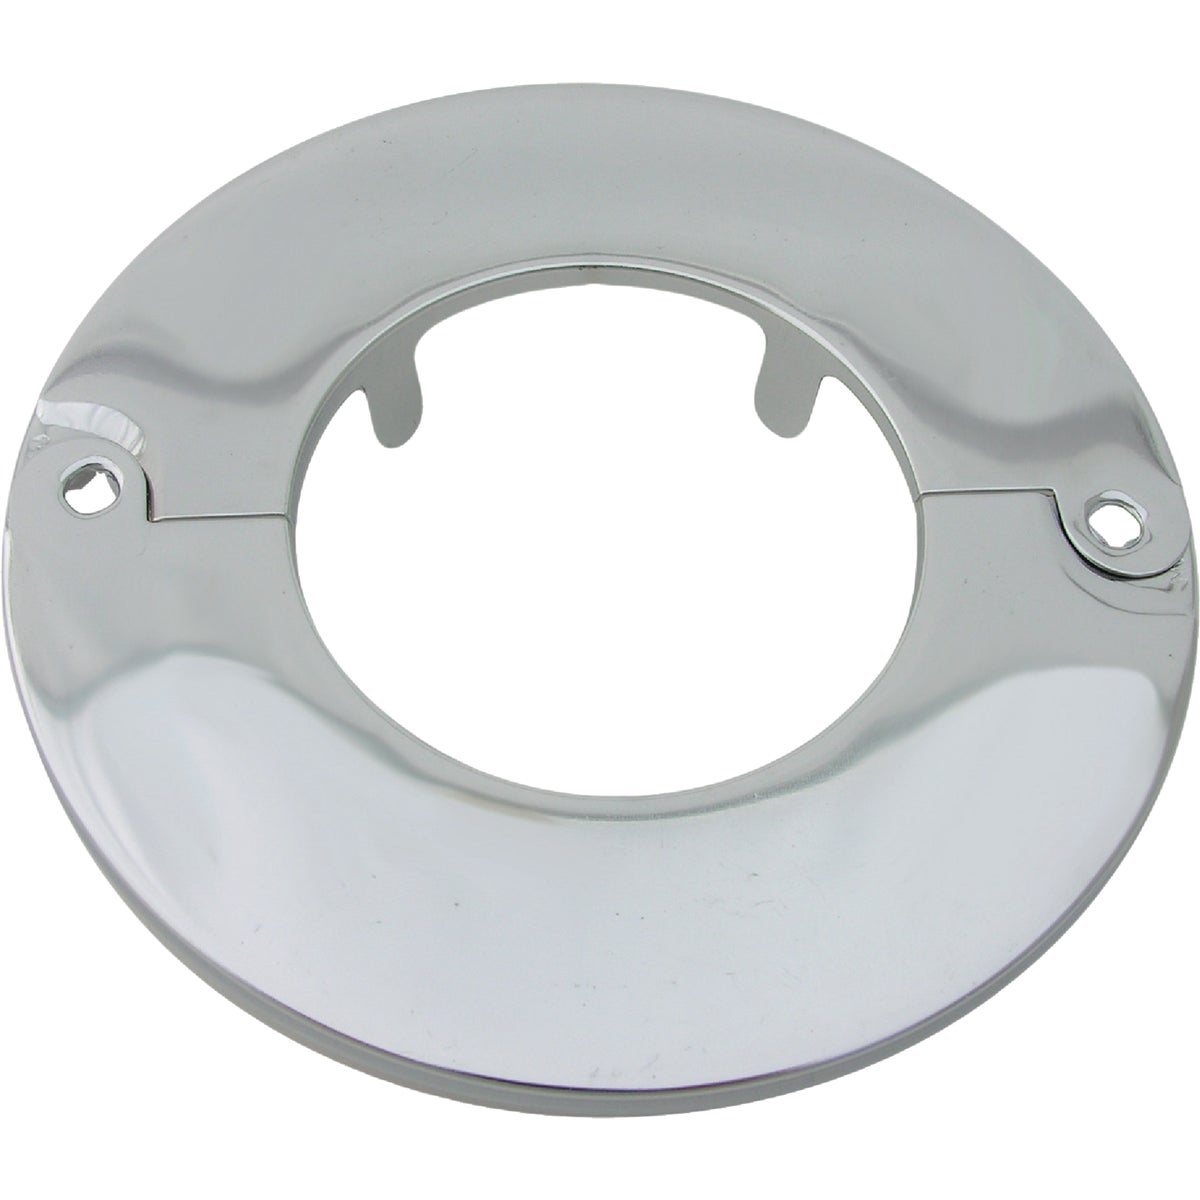 Lasco Chrome-Plated 2 In. IP or 2-3/8 In. ID Split Plate